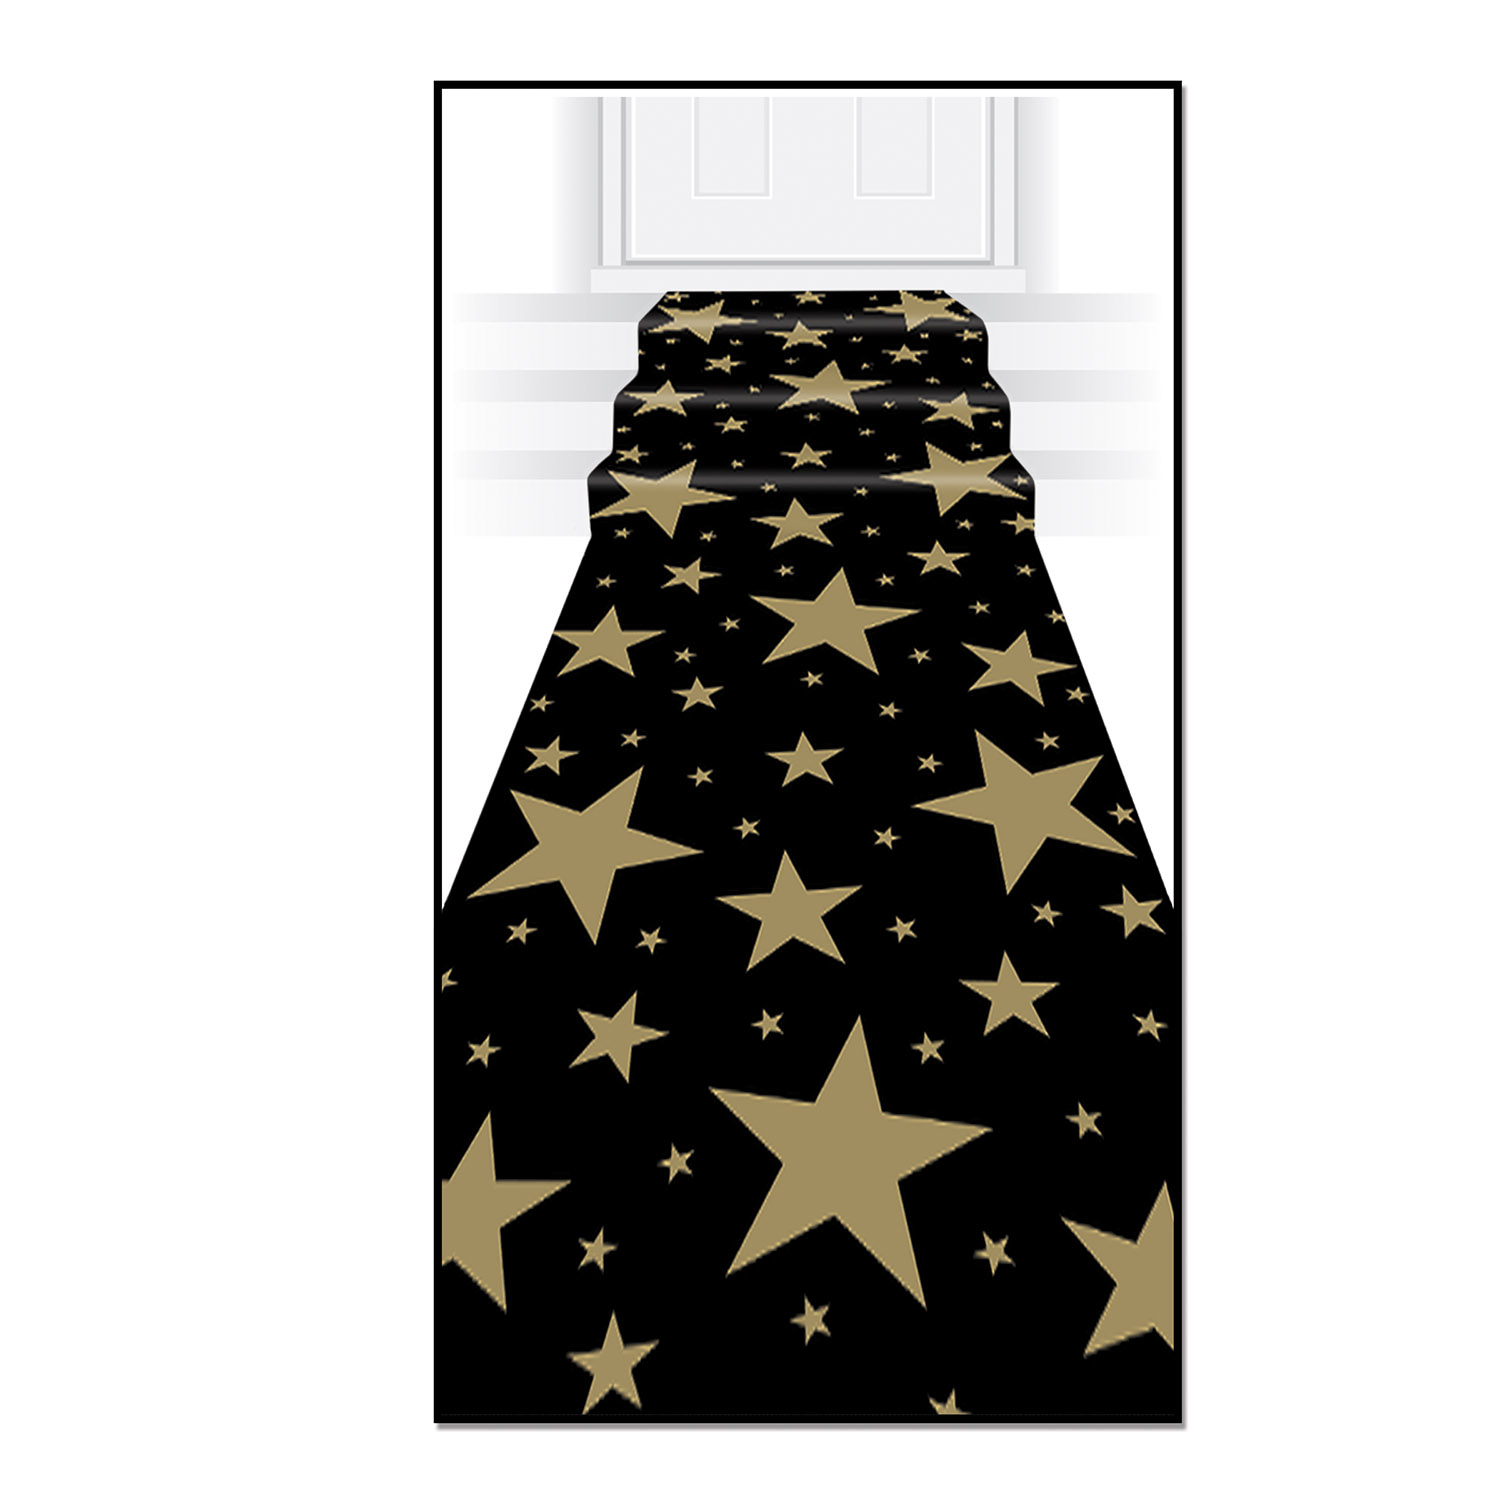 Floor runner with a black background and assorted sized gold stars.